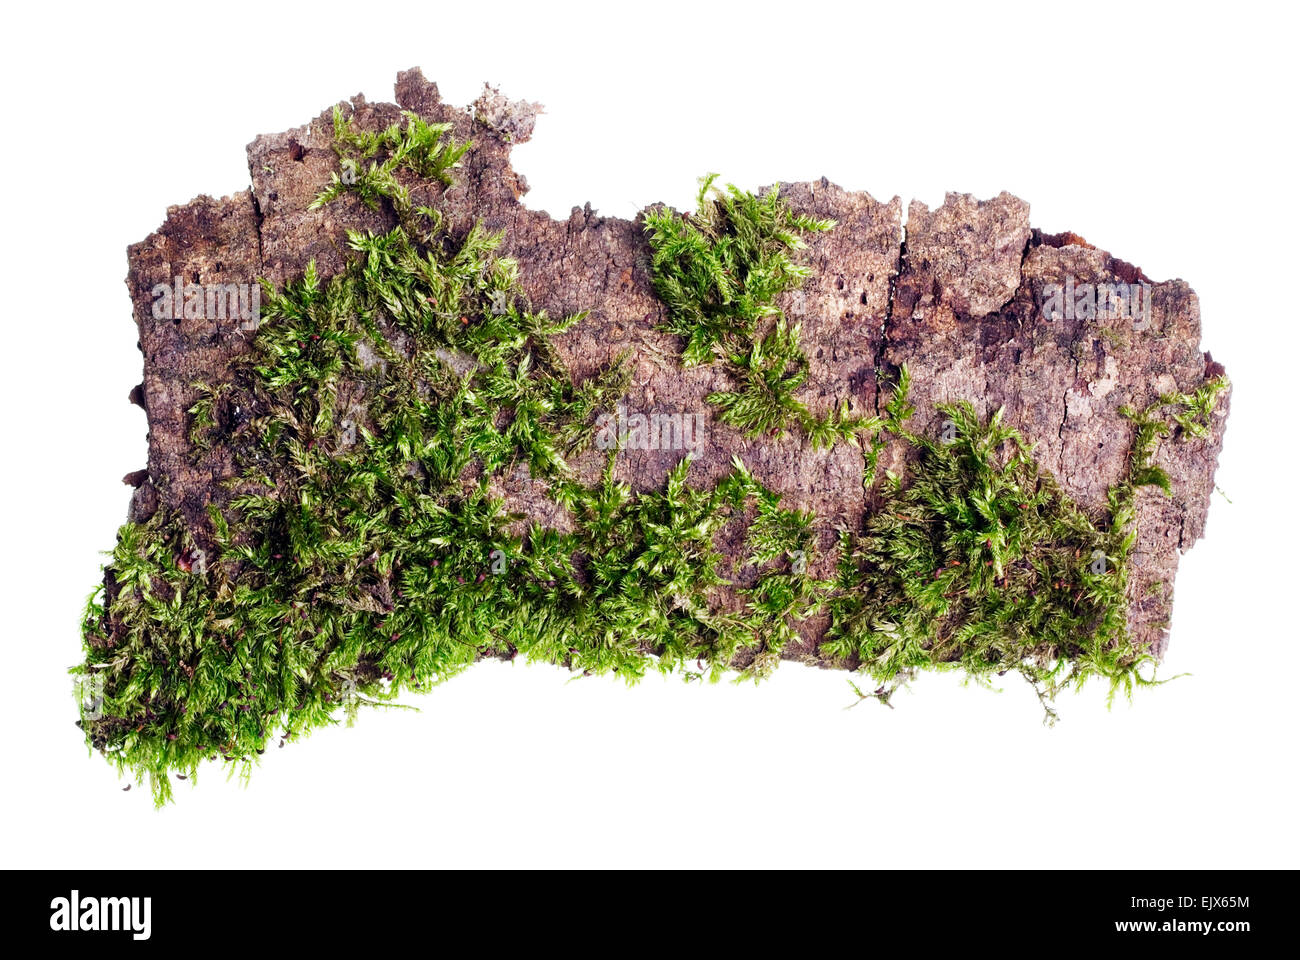 Tropical island top view isolated concept. On a piece of bark of a tree the green moss grows  macro. Stock Photo